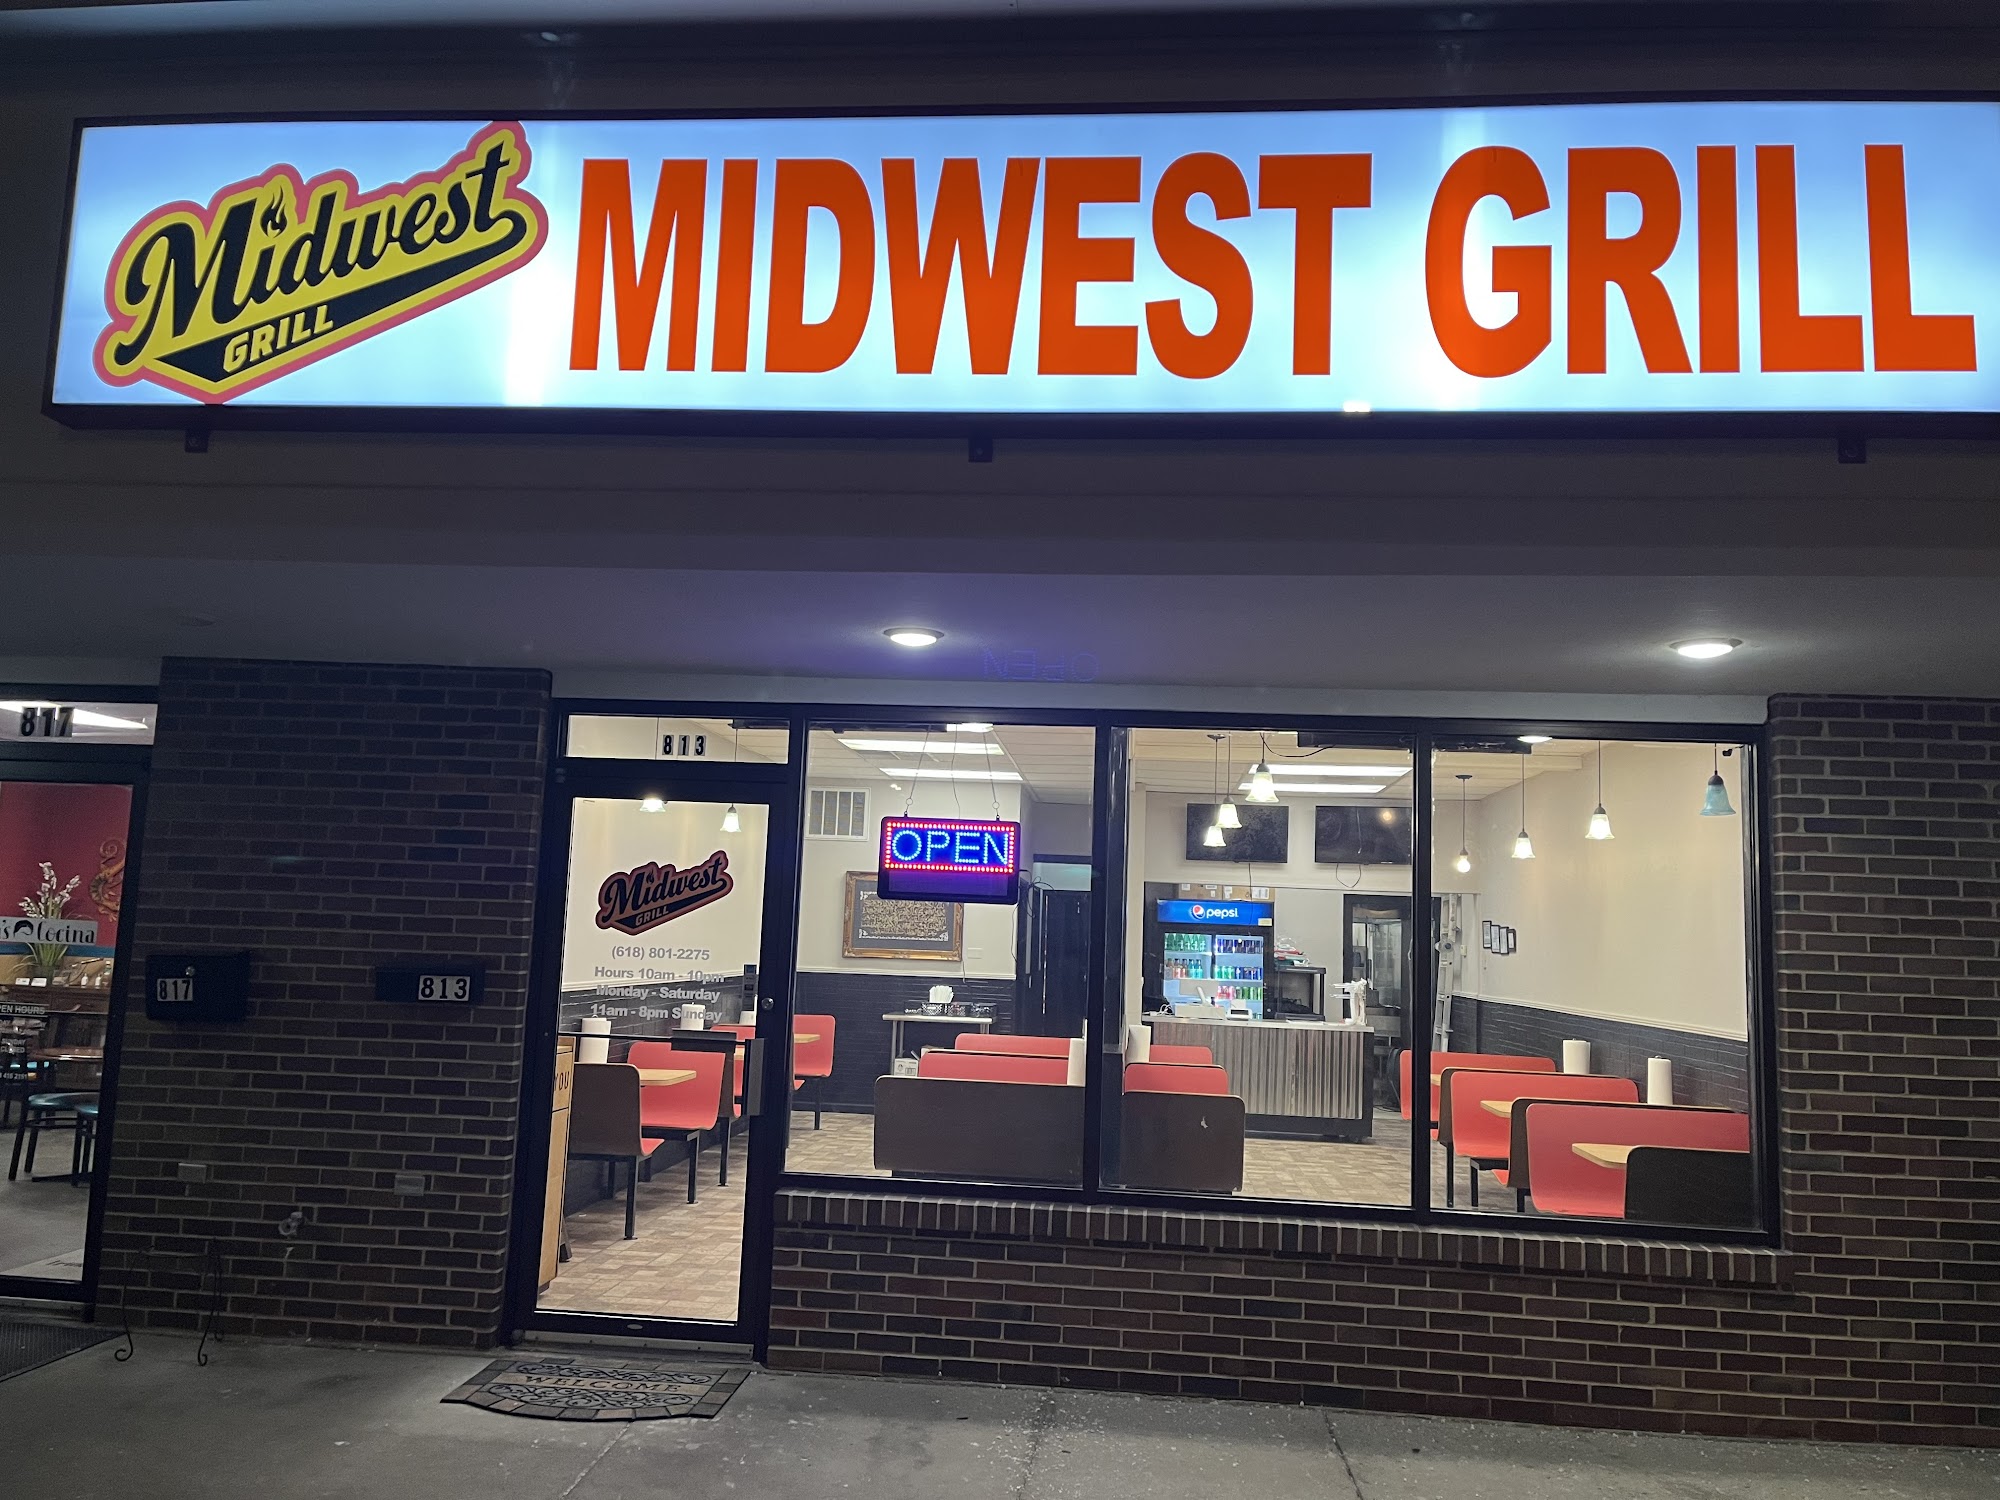 Midwest grill